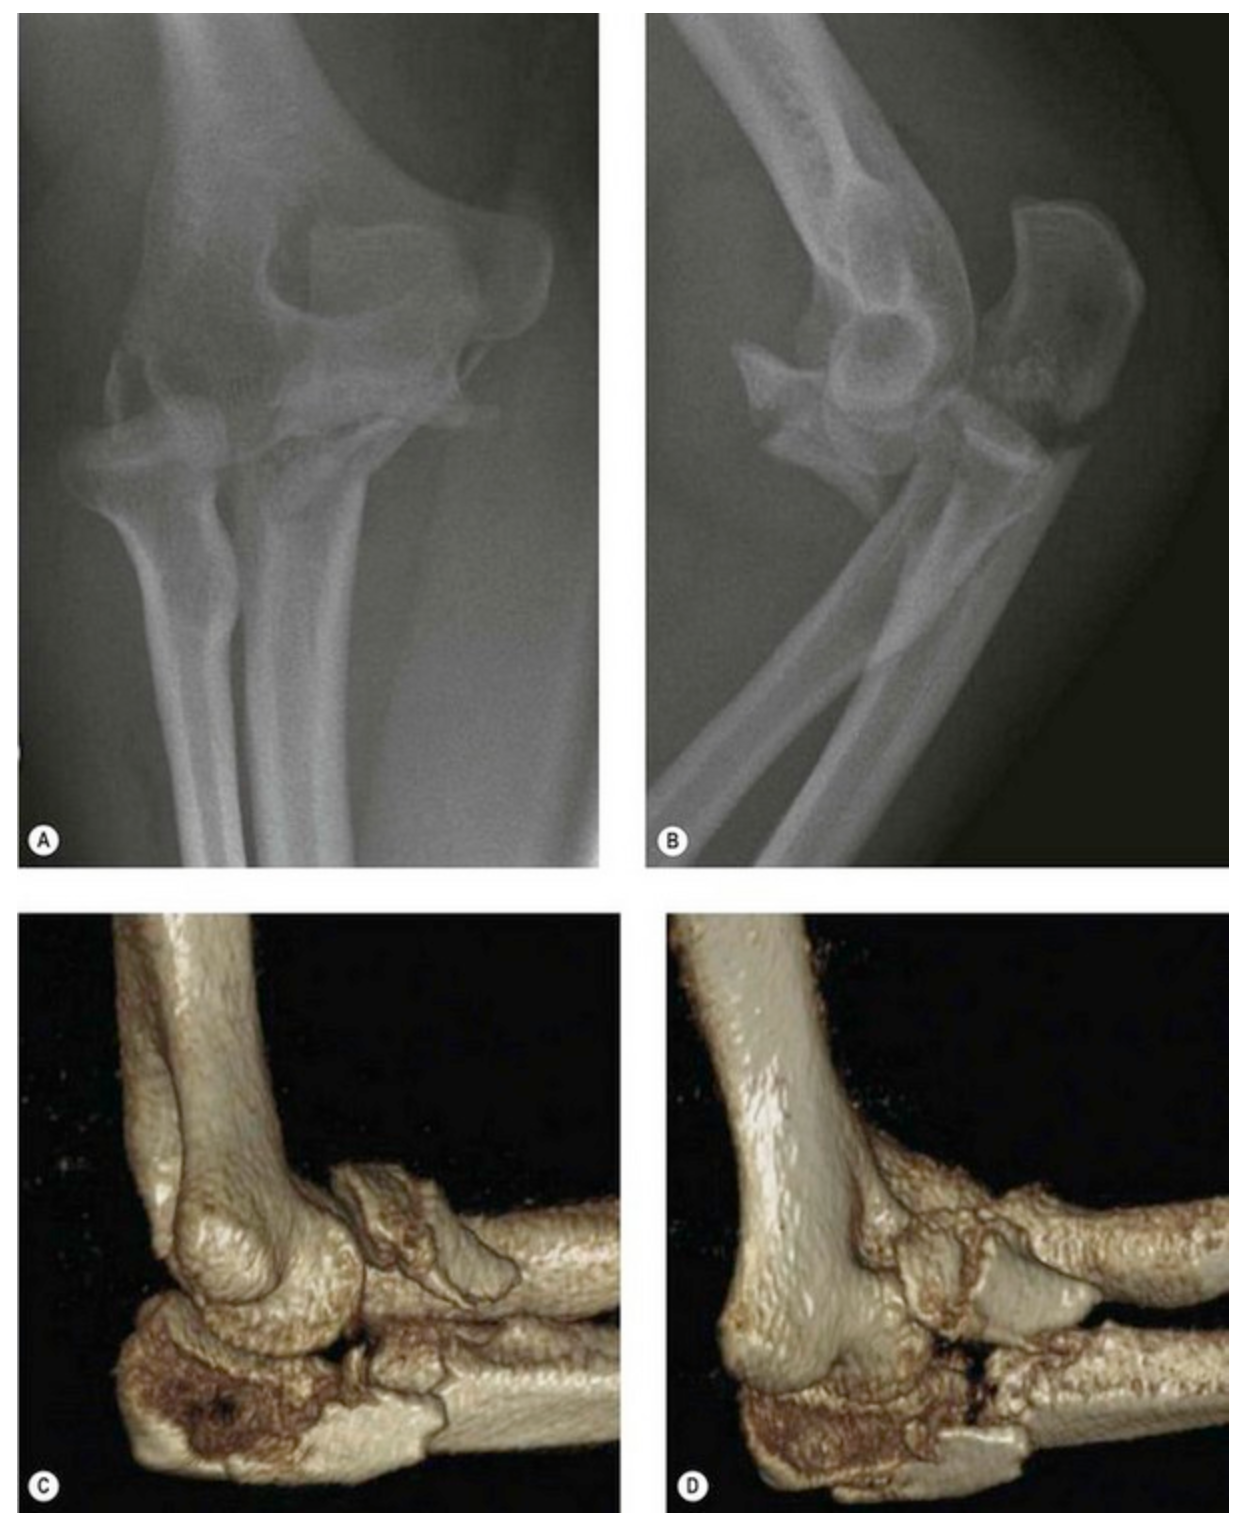 File:Type II Monteggia fracture dislocation. (A, B) The radiographs do not show the exact anatomy of the proximal ulna fracture. (C, D) CT 3-D reconstruction of the same patient clearly identifies the fracture morphology..png